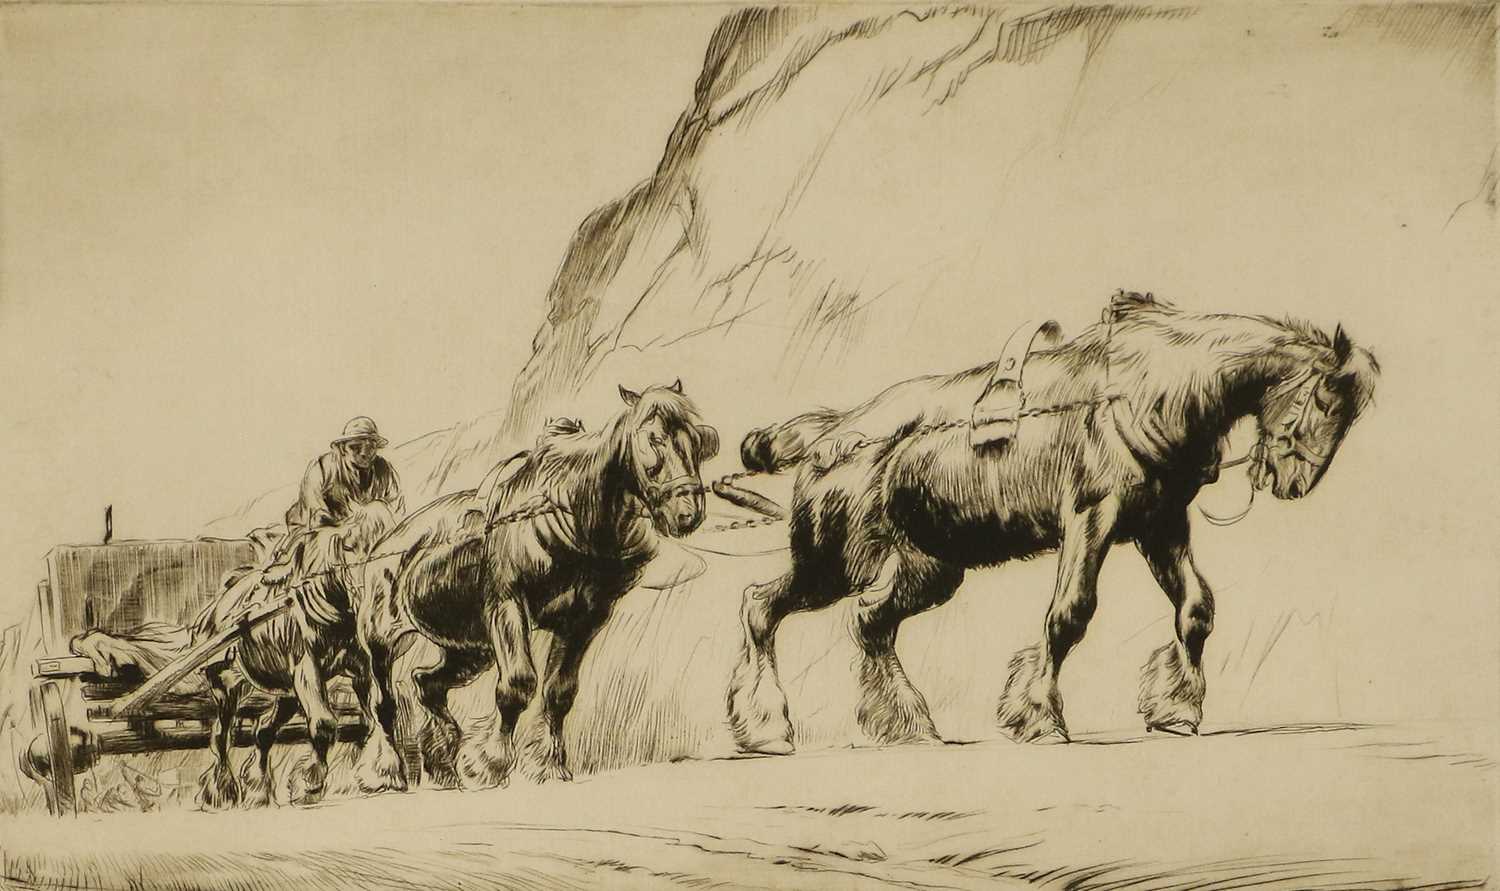 George Soper RE (1870-1942) "The Quarry Team" (1920) Signed in pencil, black and white etching,